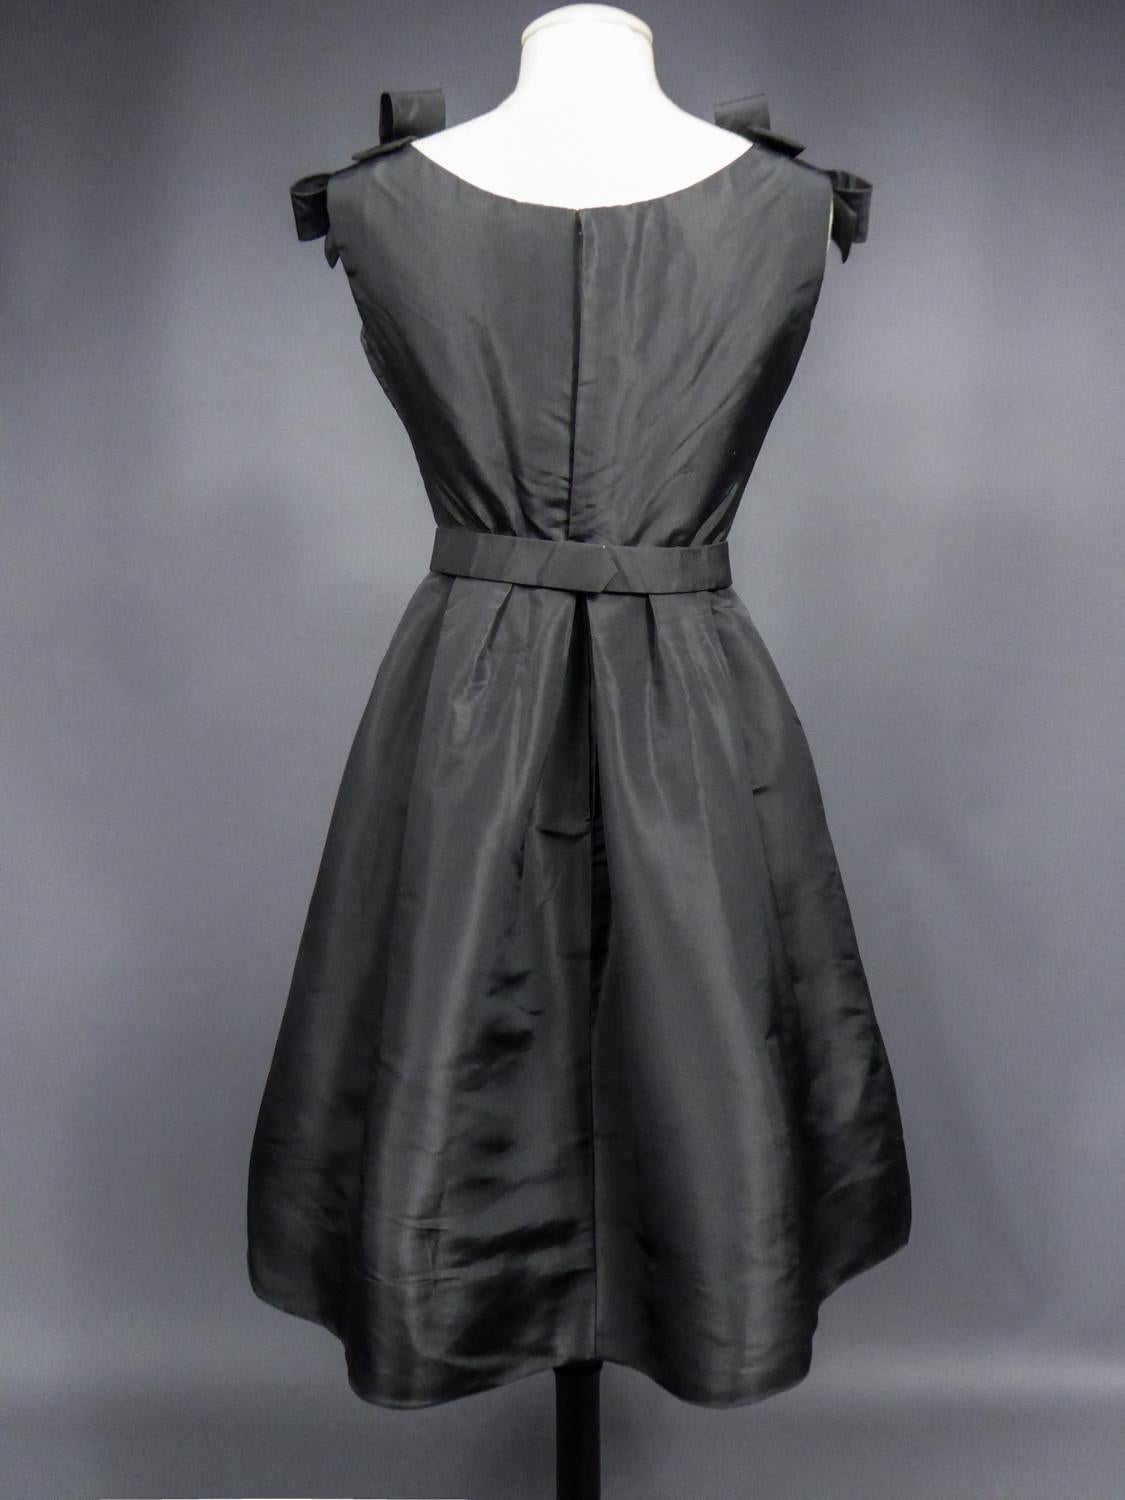 Women's Christian Dior/Yves Saint Laurent cocktail dress numbered 1014003 C. 1958/1960